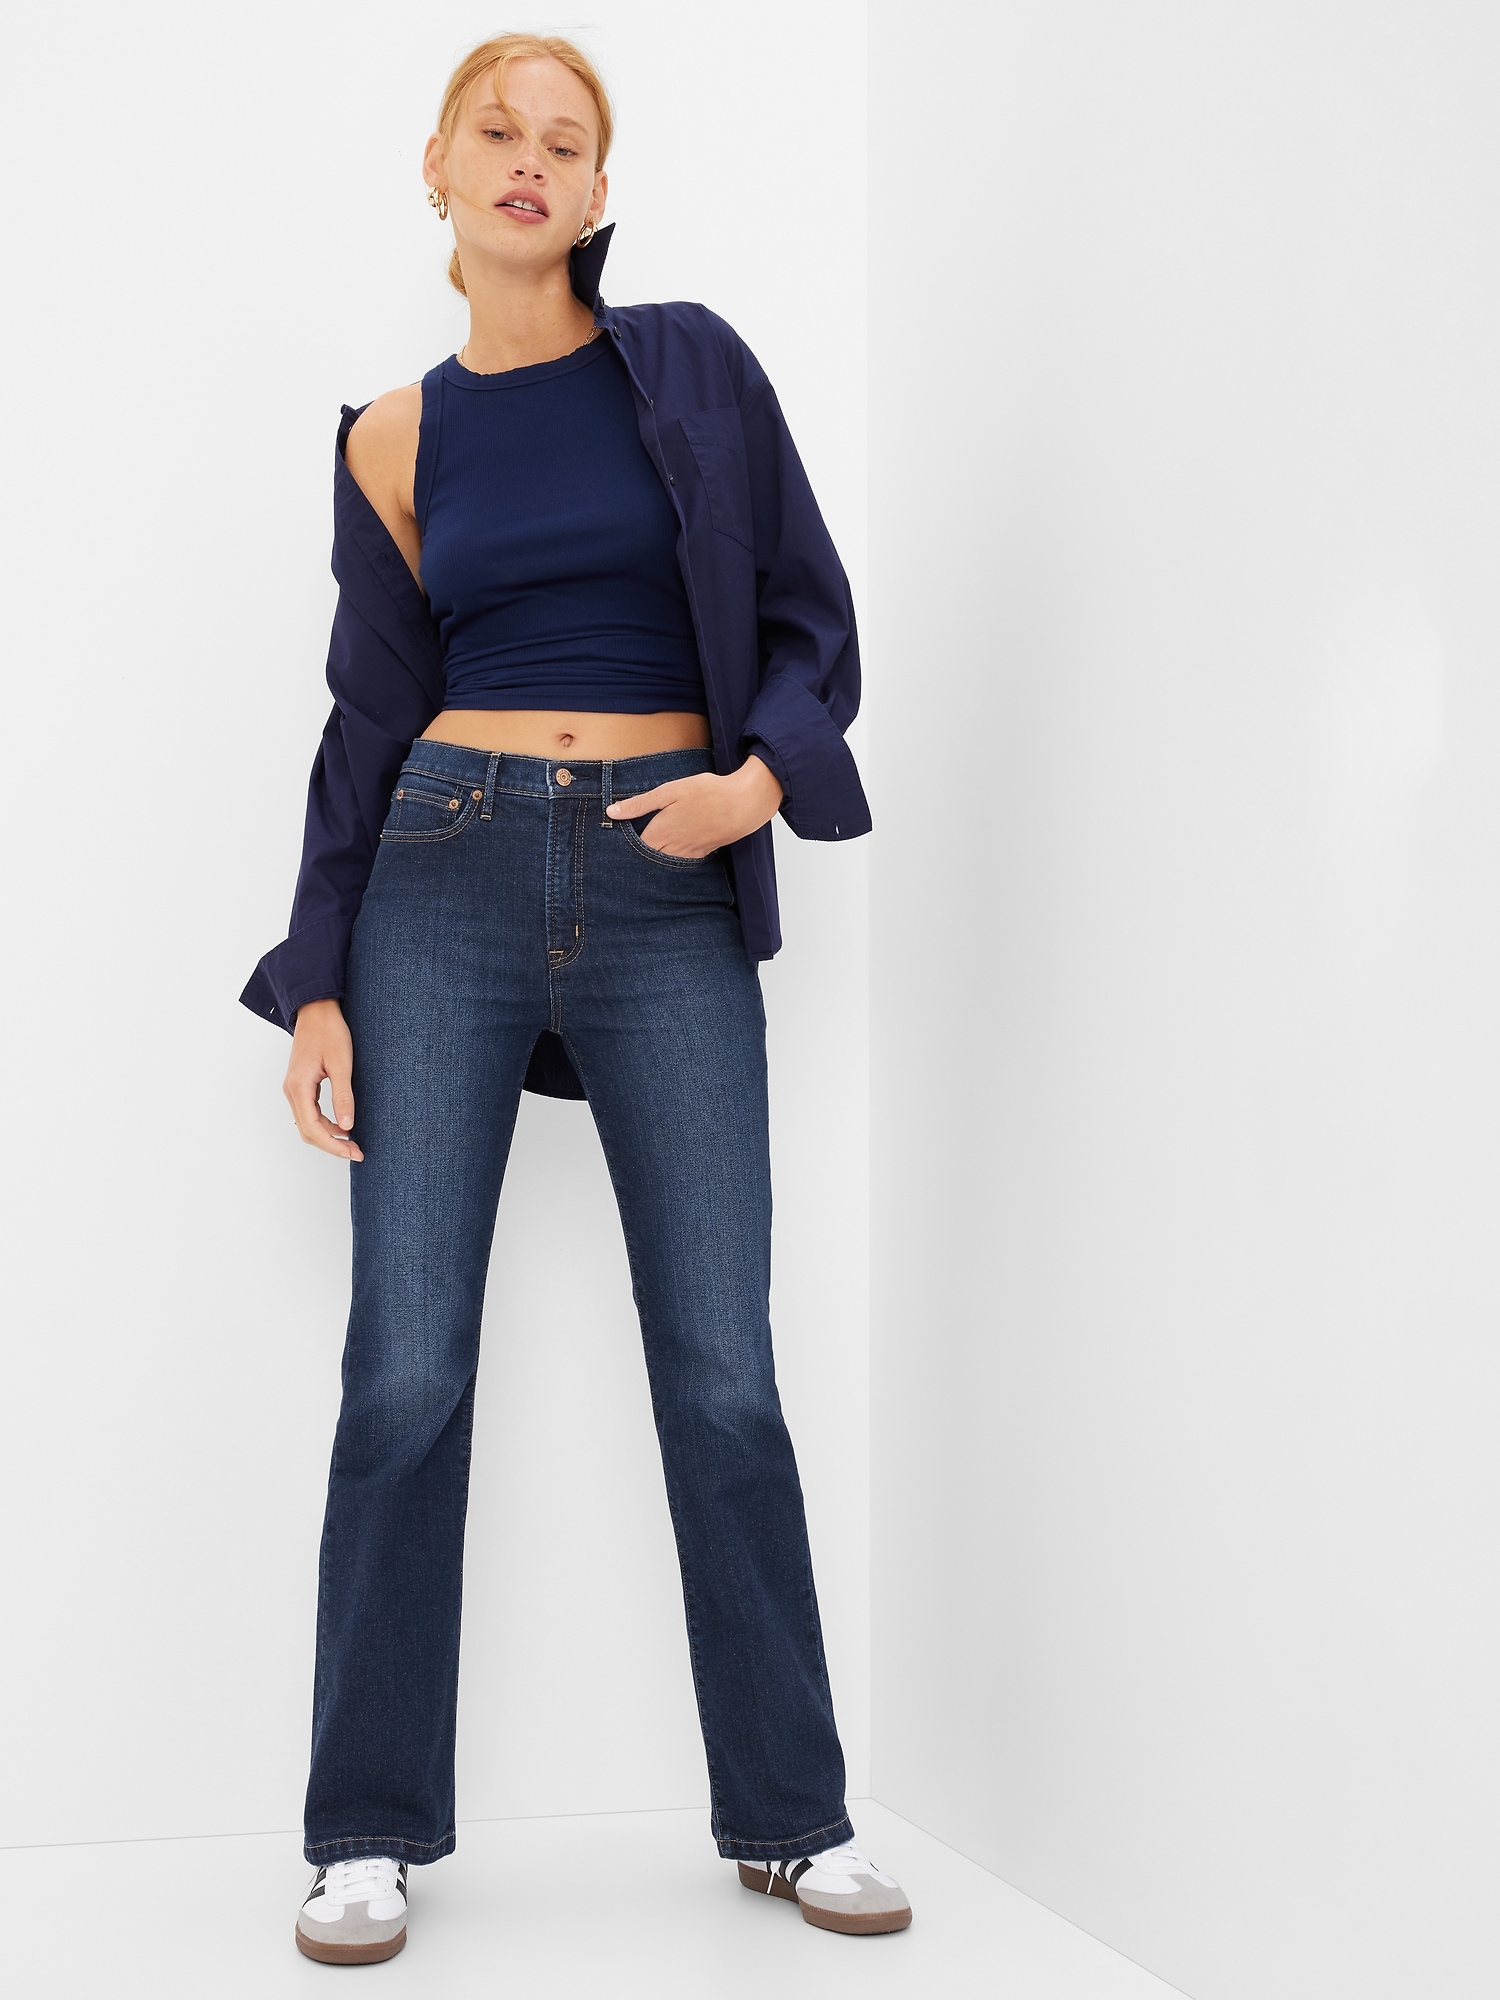 Gap 70s Flare Jeans with Washwell